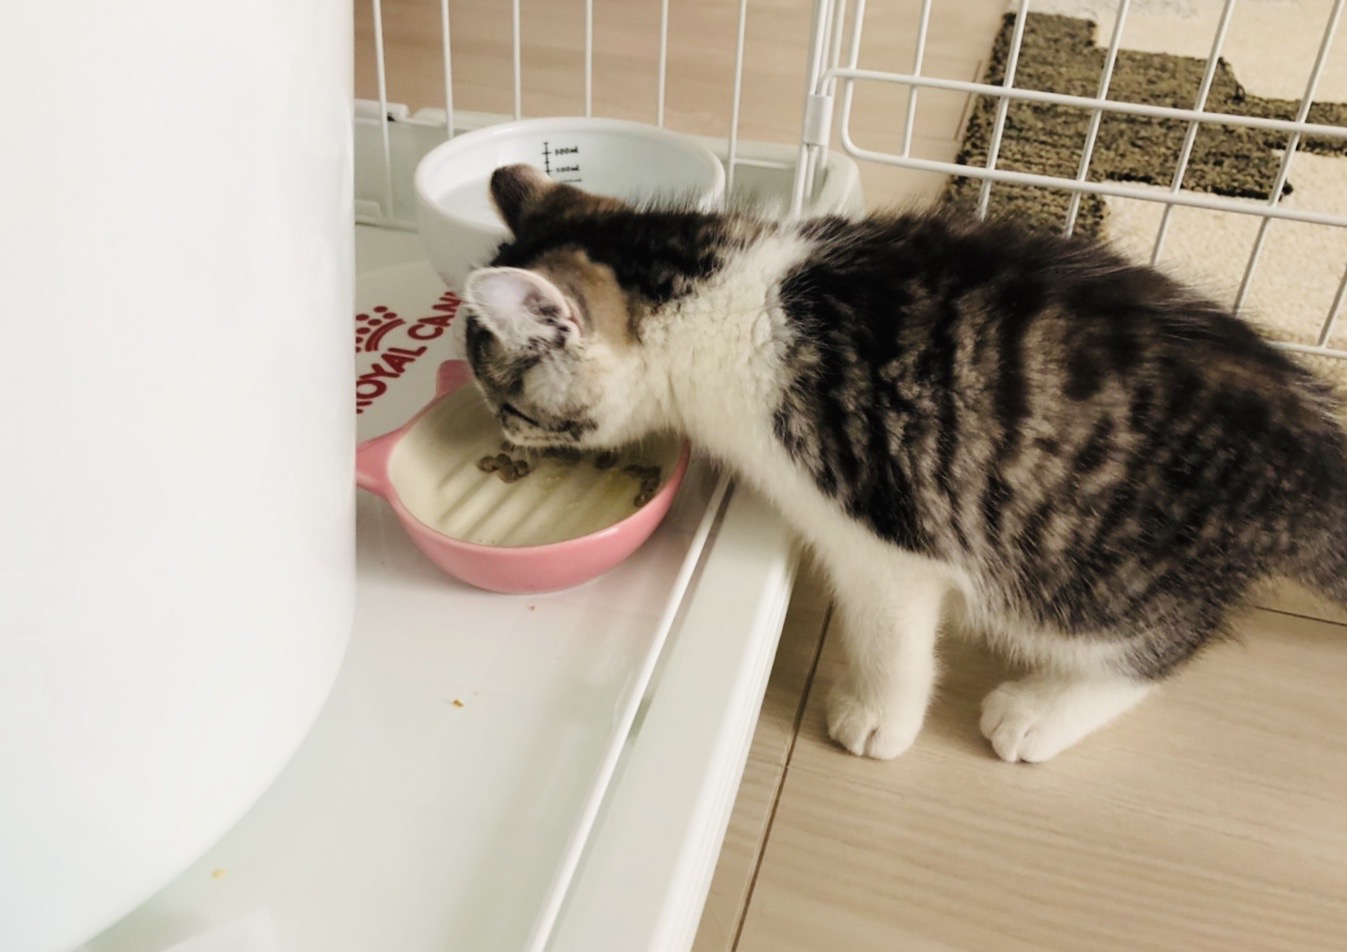 Signs that a kitten wants to be fed